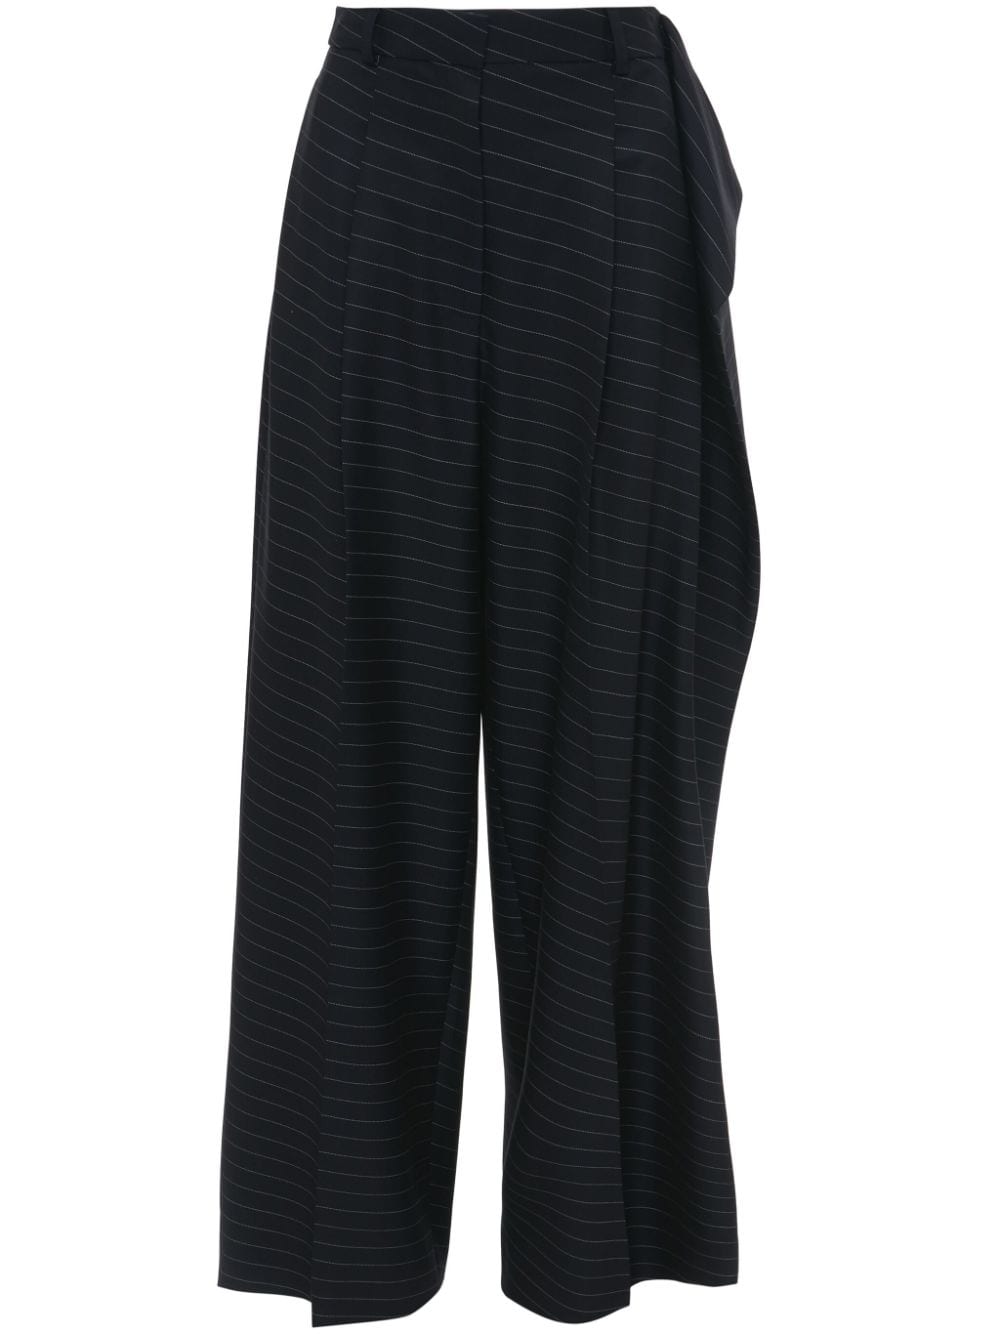 JW ANDERSON Navy Striped Pants for Women - SS24 Collection